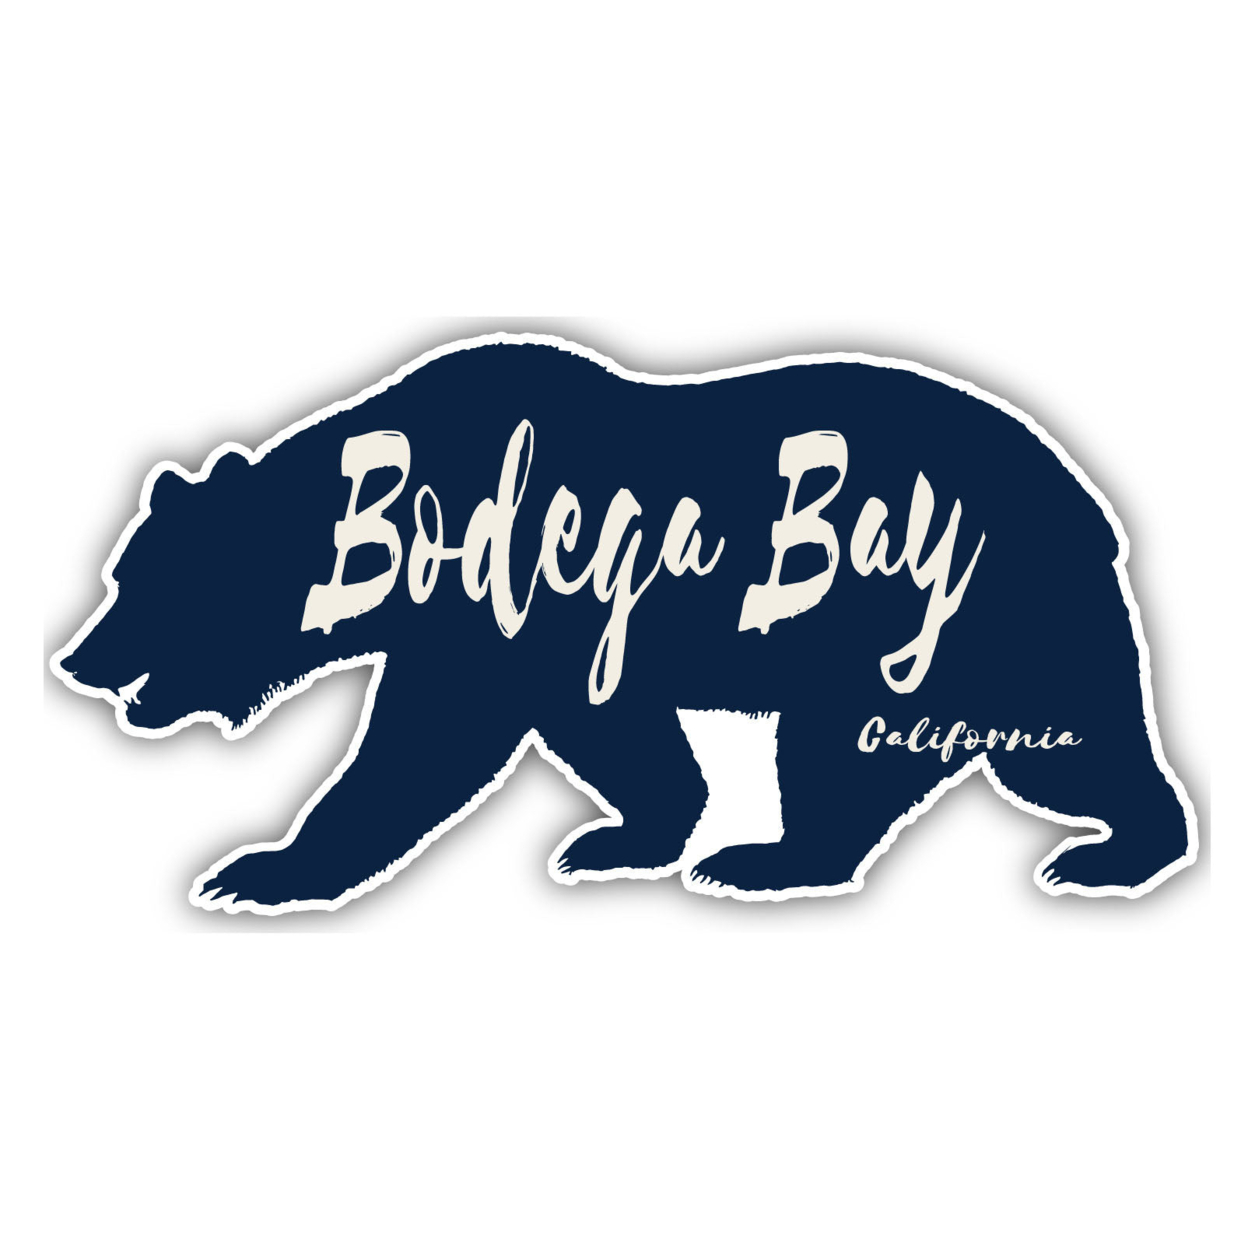 Bodega Bay California Souvenir Decorative Stickers (Choose Theme And Size) - 4-Pack, 12-Inch, Tent